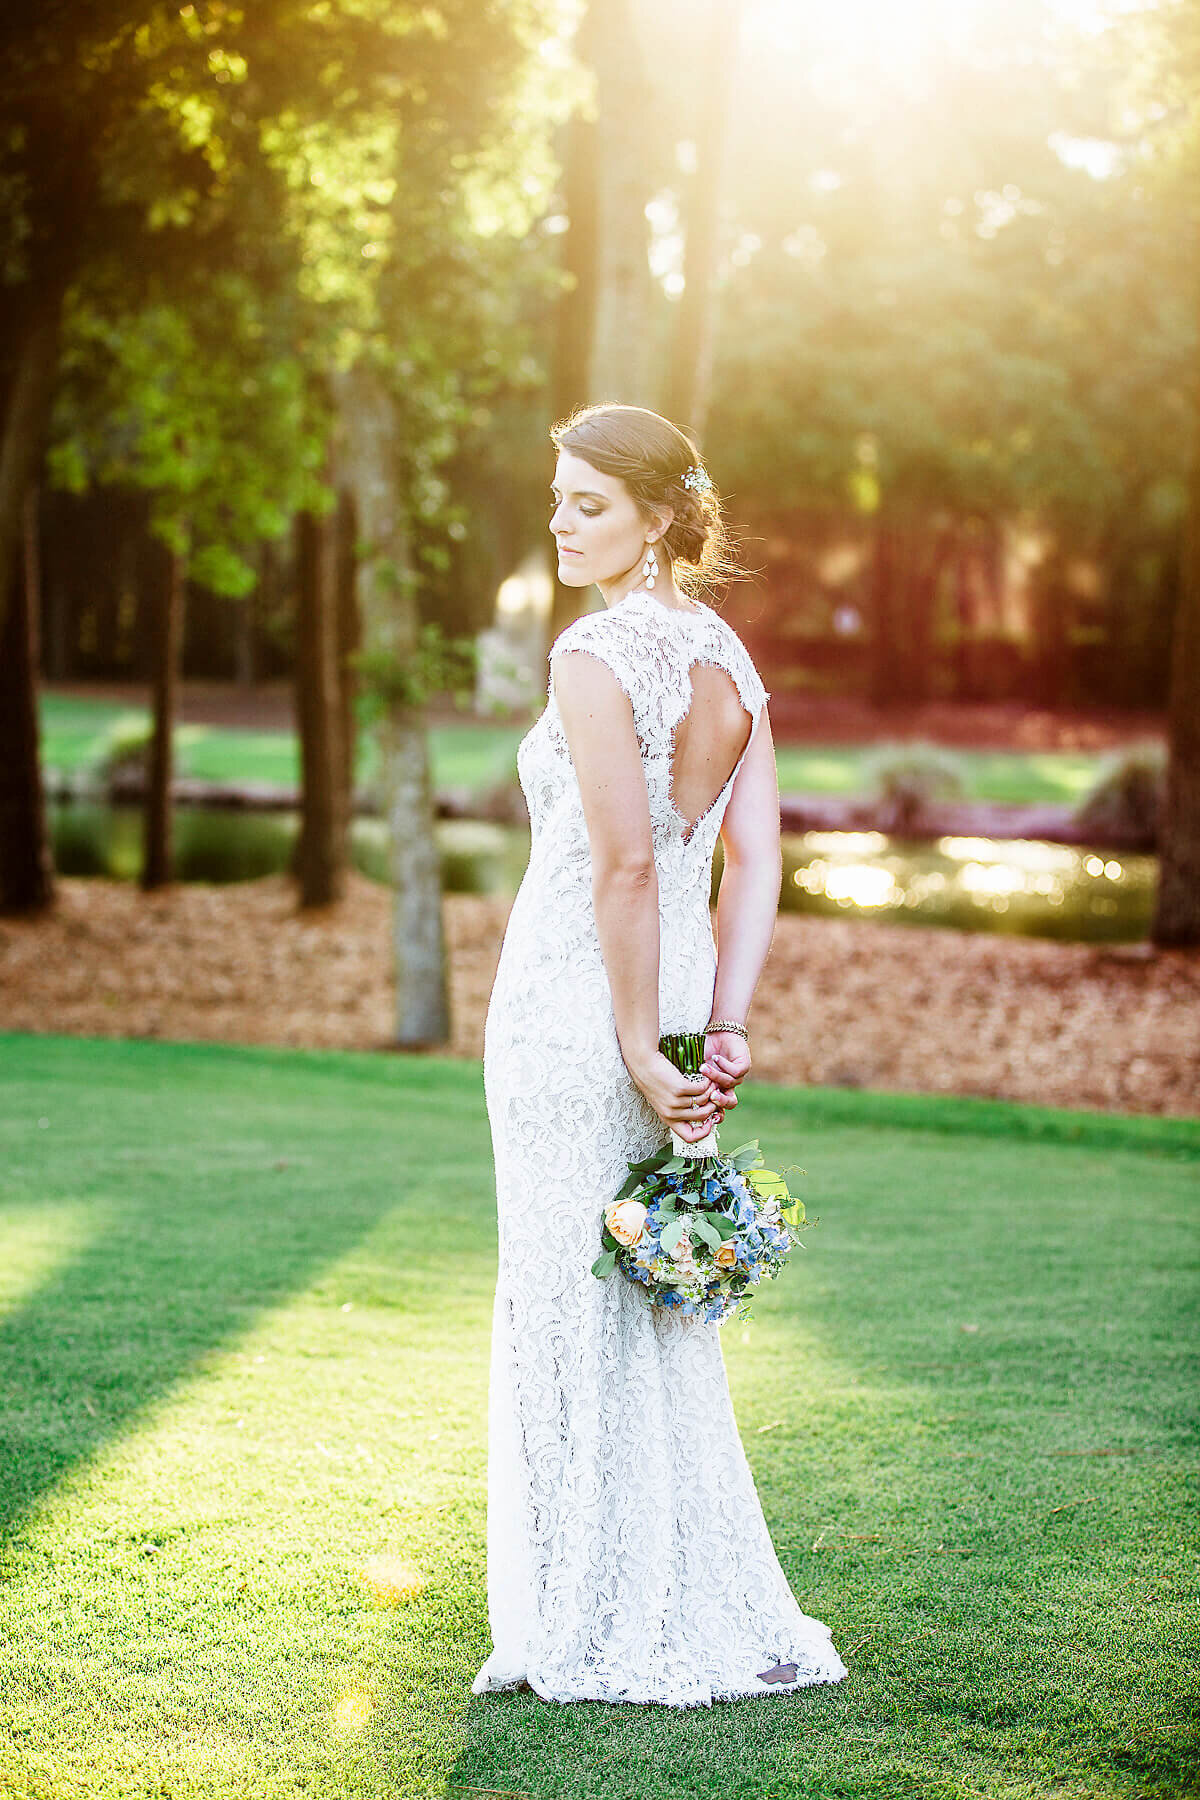 Izzy + Co. Athens and Savannah wedding and lifestyle photographer